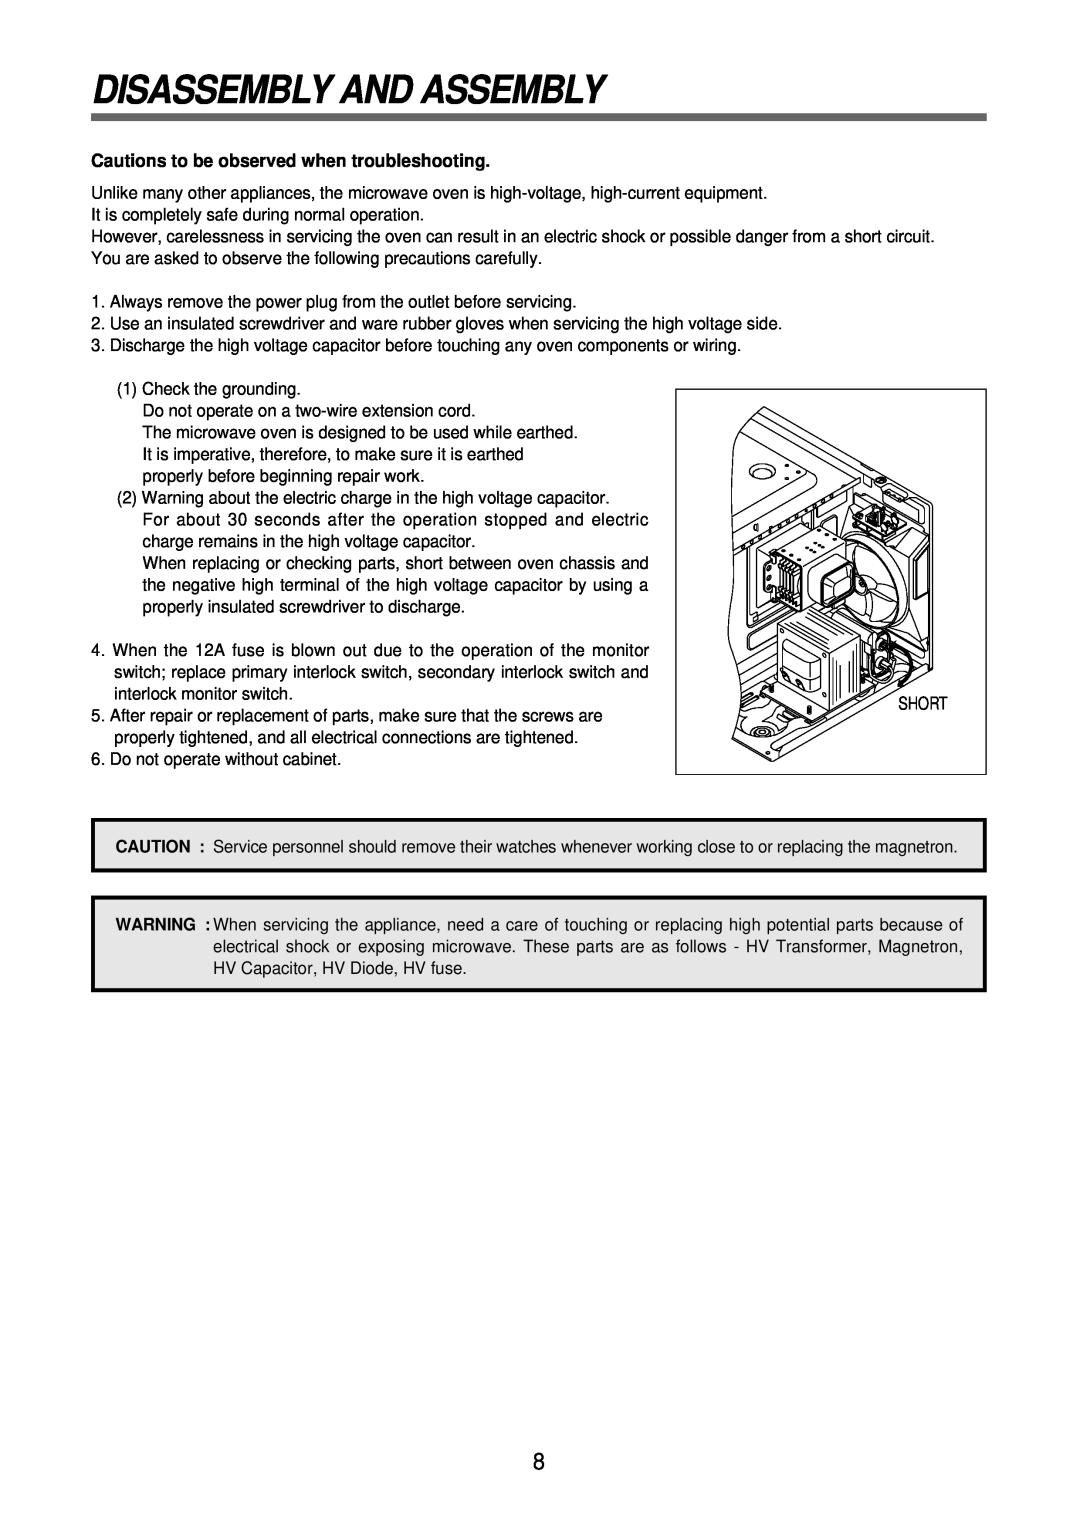 Daewoo KOR-6N575S, Microwave Oven service manual Disassembly And Assembly, Cautions to be observed when troubleshooting 